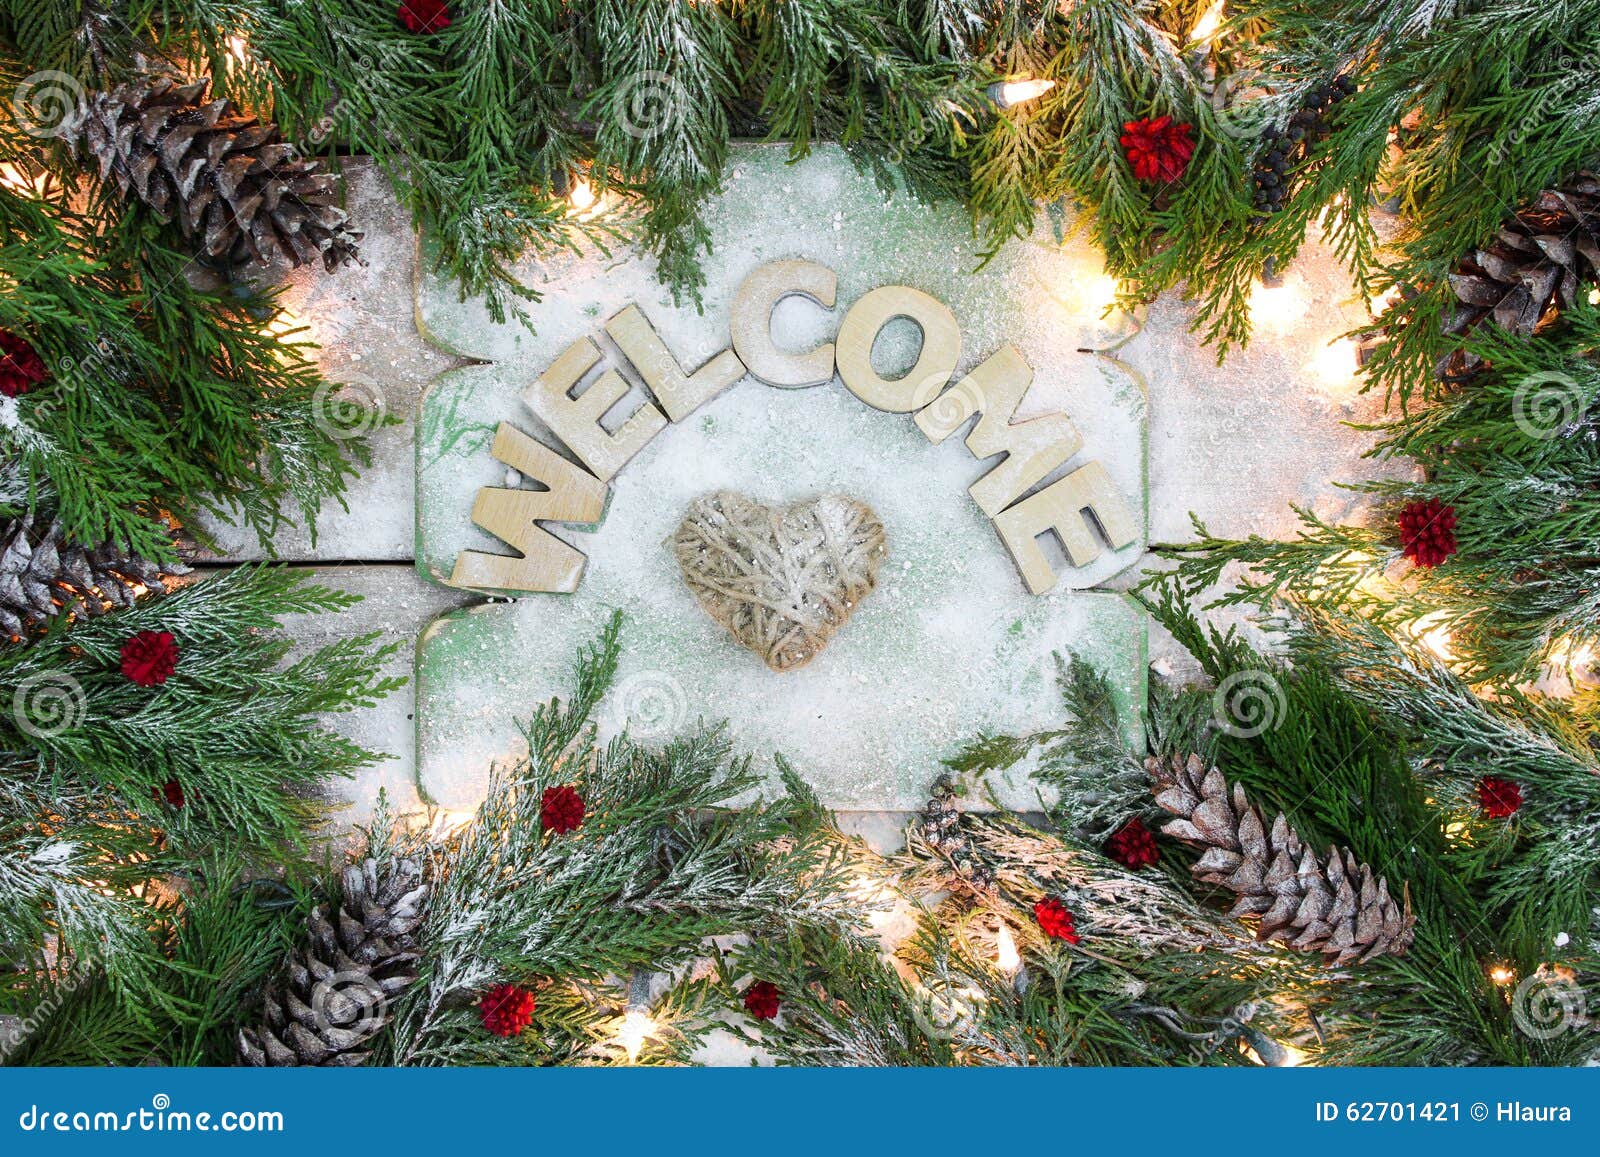 holiday welcome sign